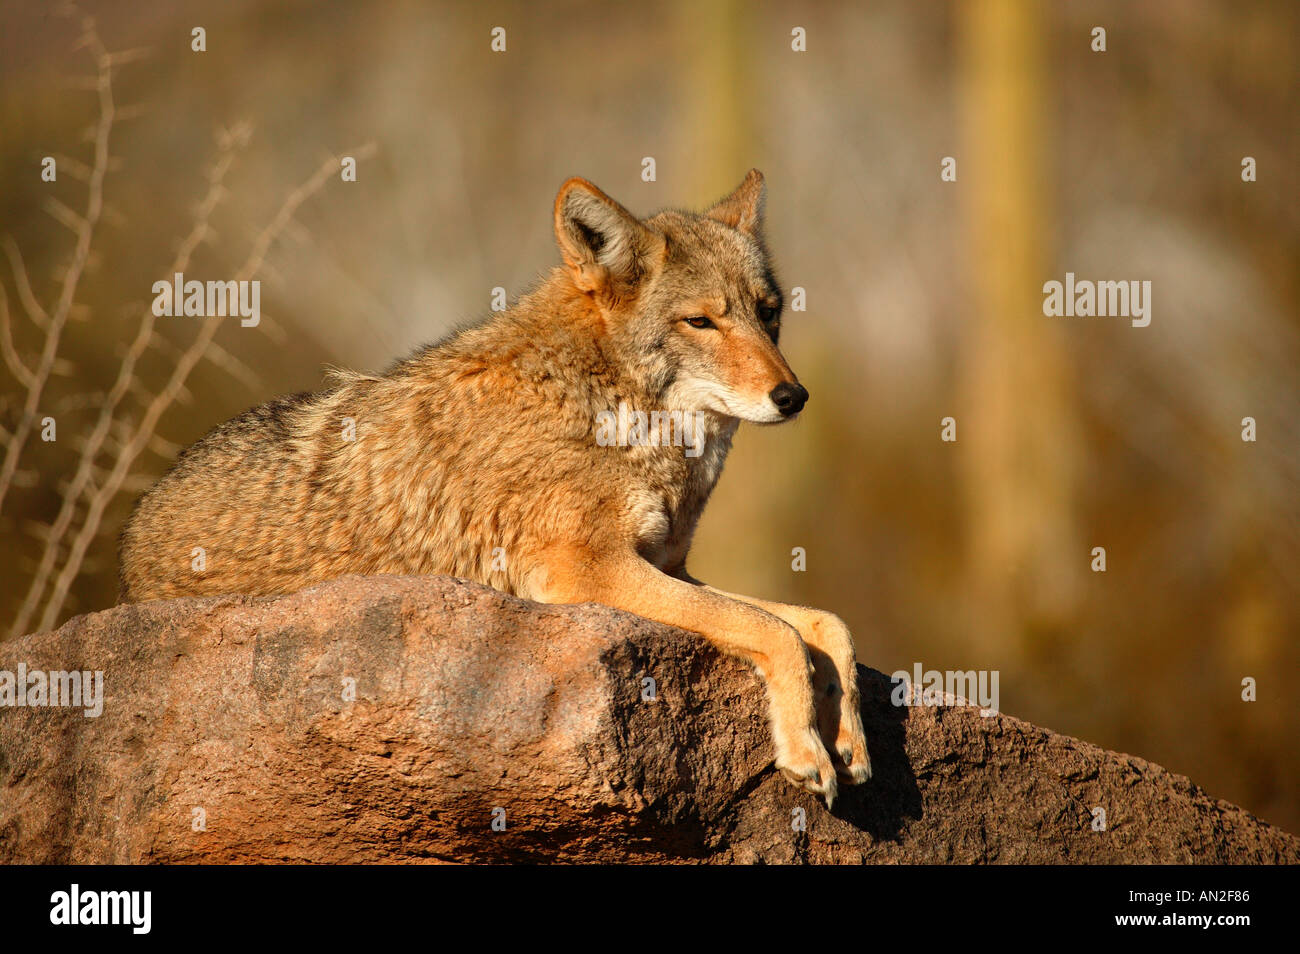 A Lone Coyote Sitting On A Rock In The Desert Stock Photo, Picture